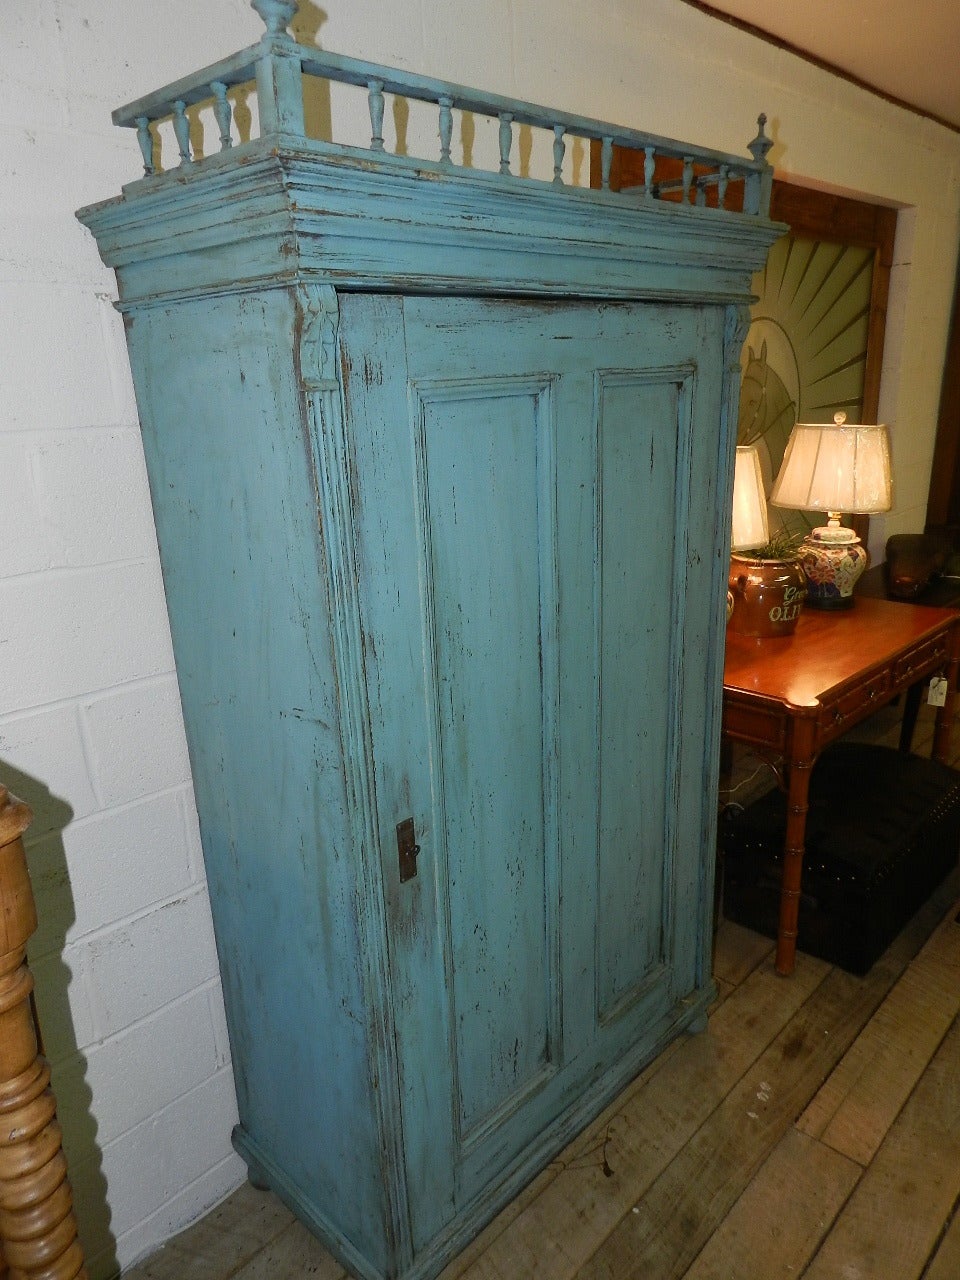 Antique pine armoire with original blue paint. The interior has three removable shelves. The single paneled door still has the original lock, key and escutcheon.